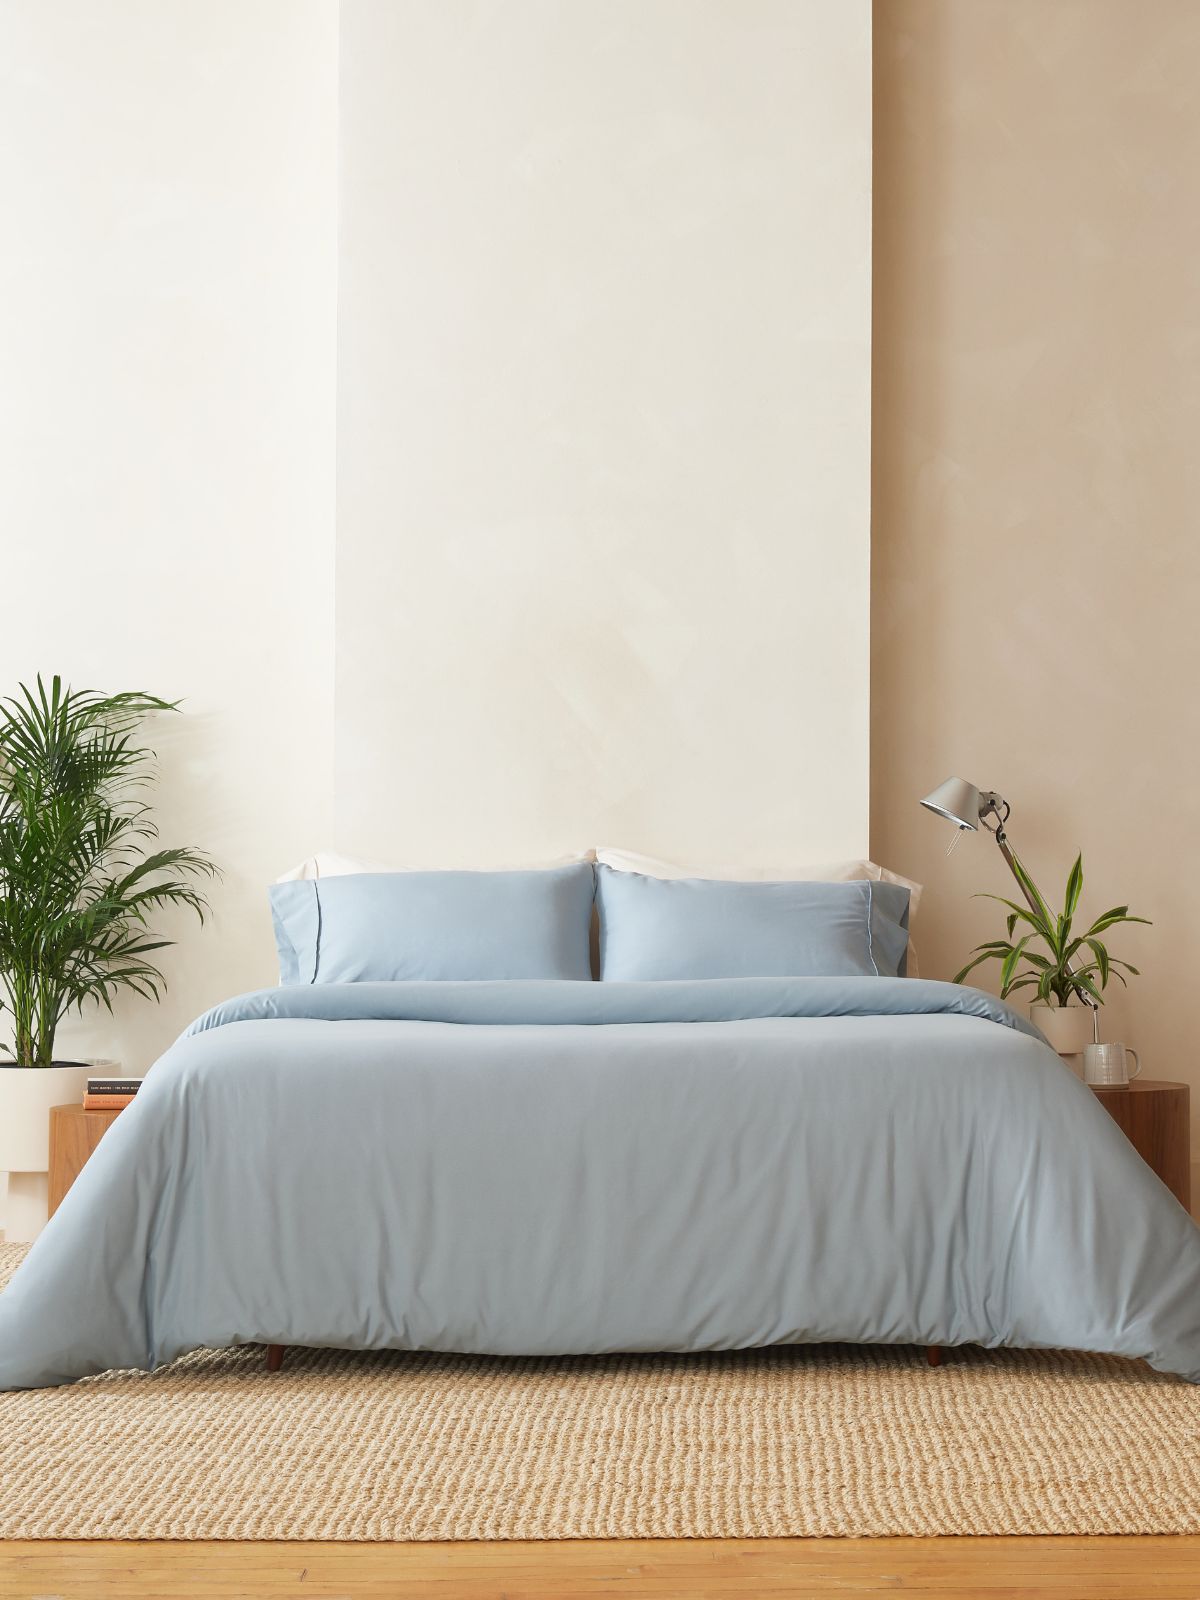 Duvet Covers + Pillows + Comforters + Bed Sheets Canada